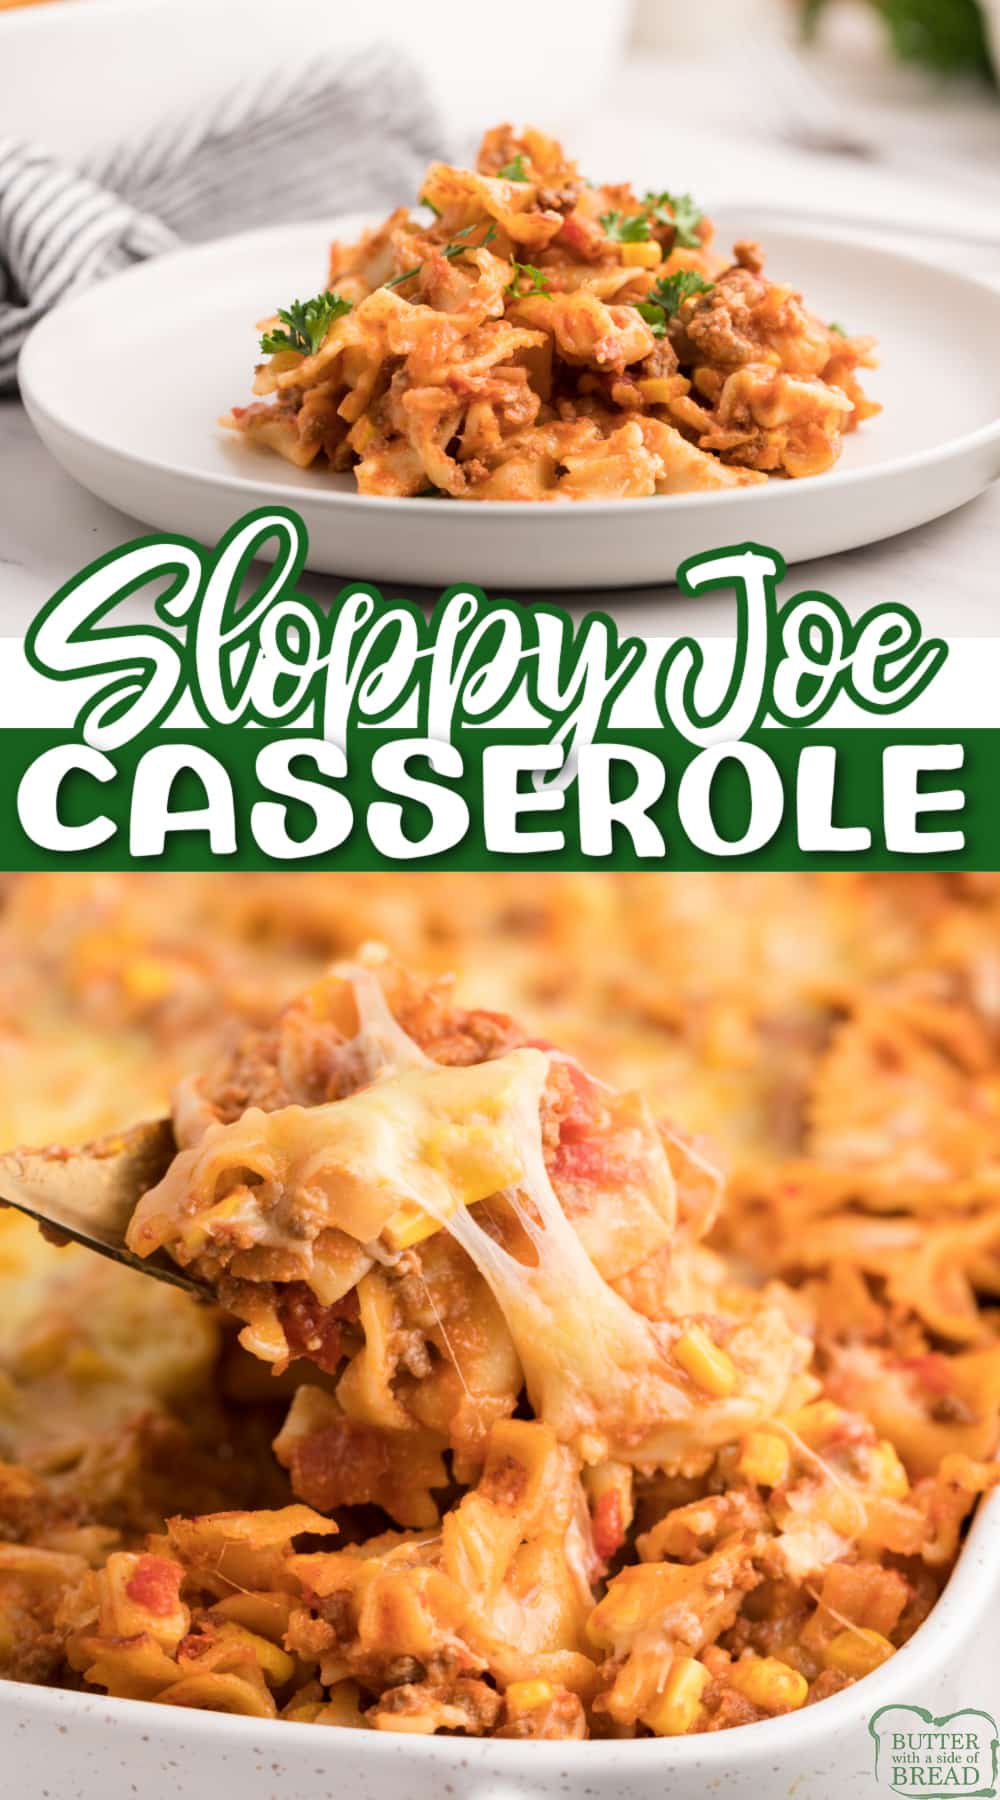 Sloppy Joe Casserole made with pasta coated in a ground beef, tomato and cheese based sauce, topped with yet more cheese and baked to perfection.  Easy weeknight dinner recipe that the whole family will enjoy! 